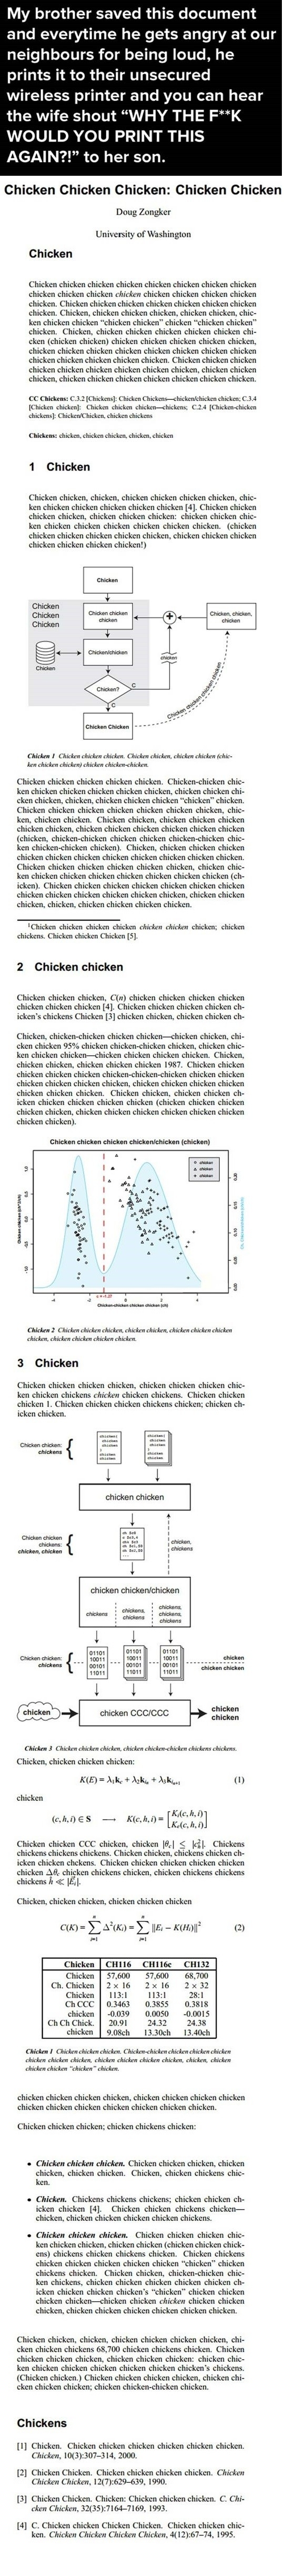 Chicken has no meaning anymore repost from rfunny